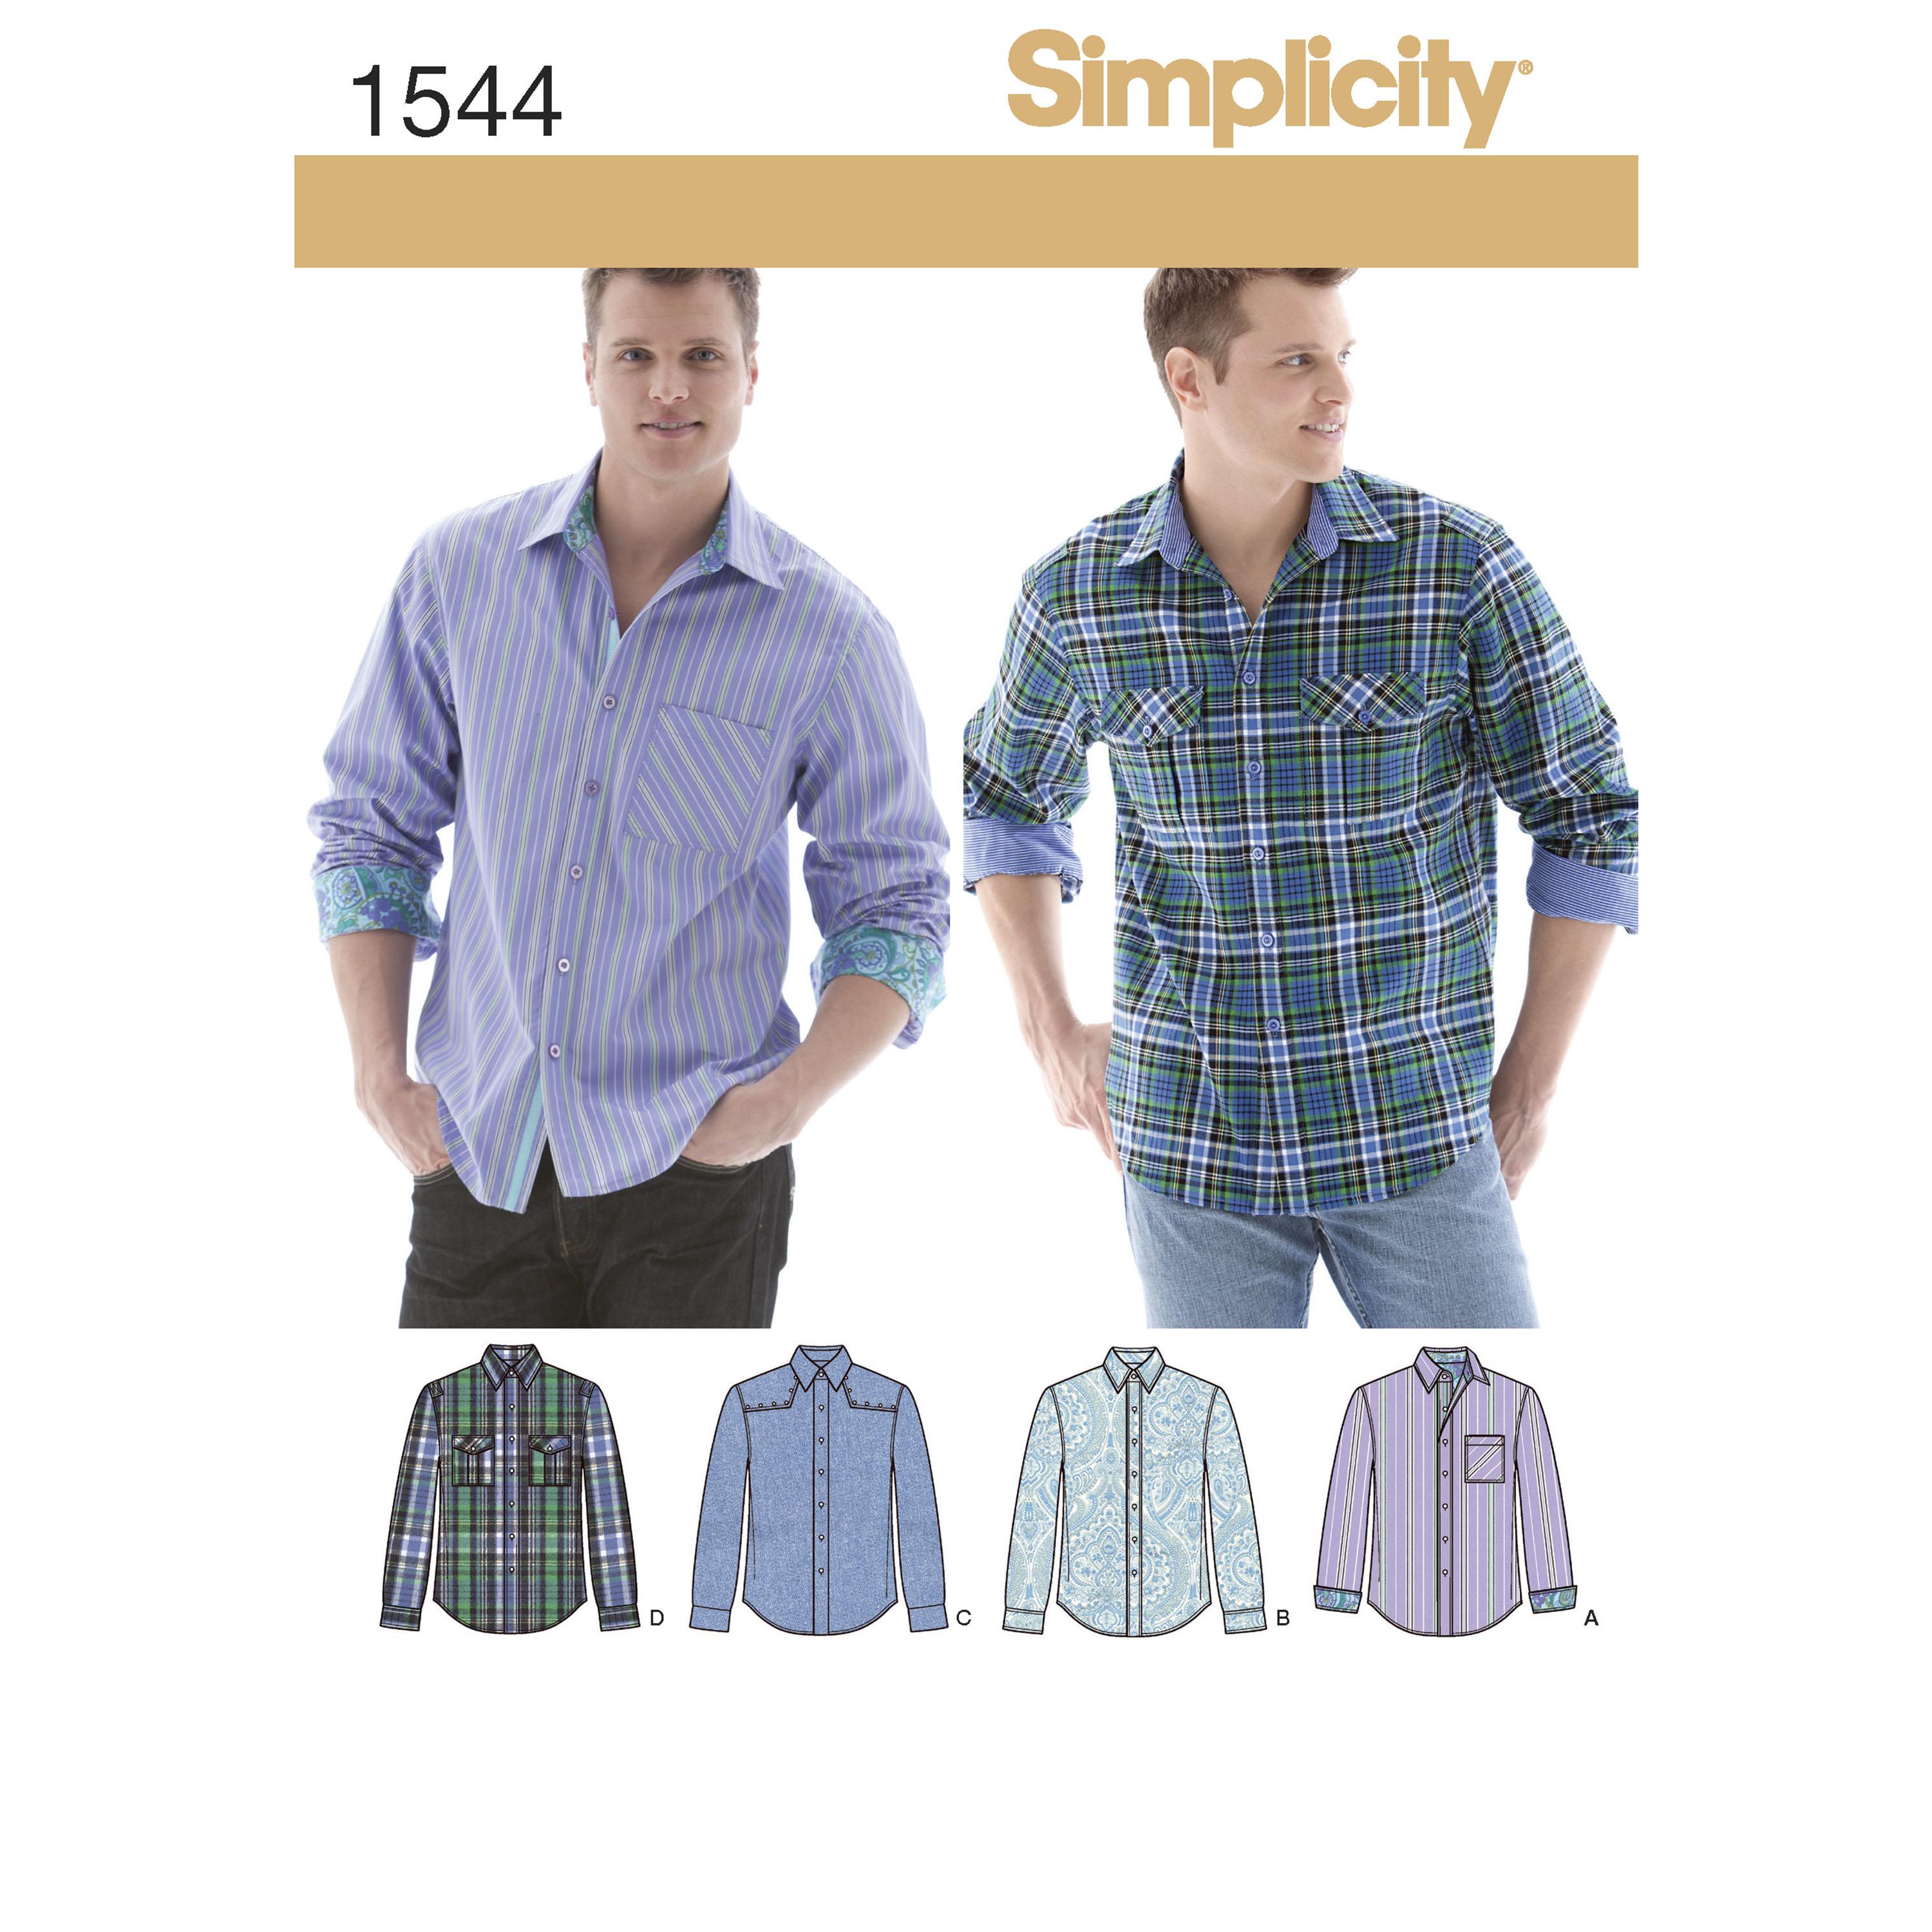 Simplicity S1544 Men's Shirt with Fabric Variations